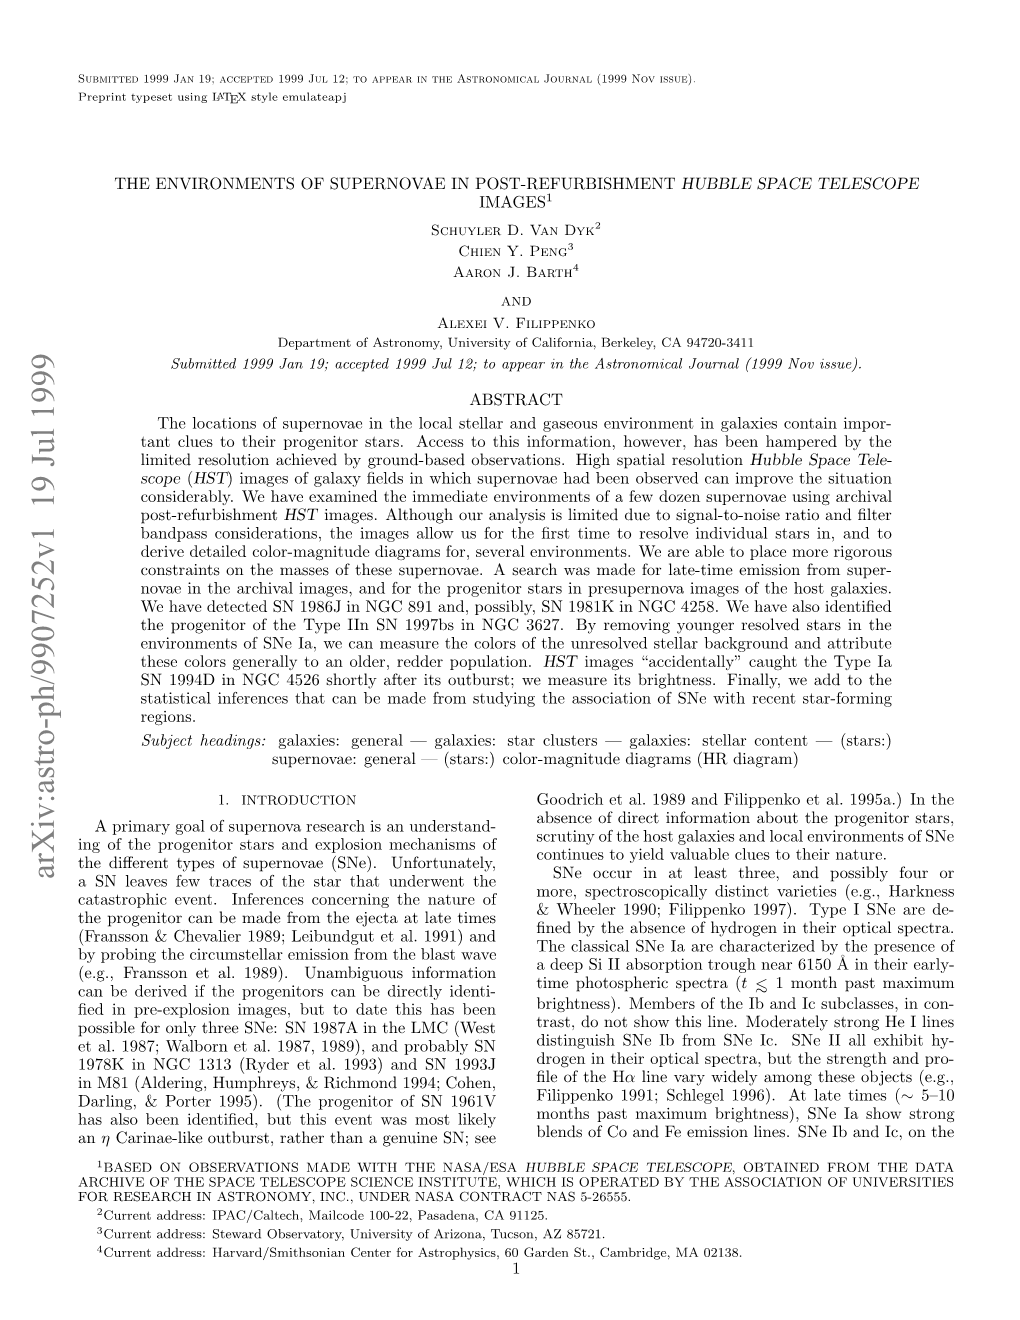 The Environments of Supernovae in Post-Refurbishment Hubble Space Telescope Images